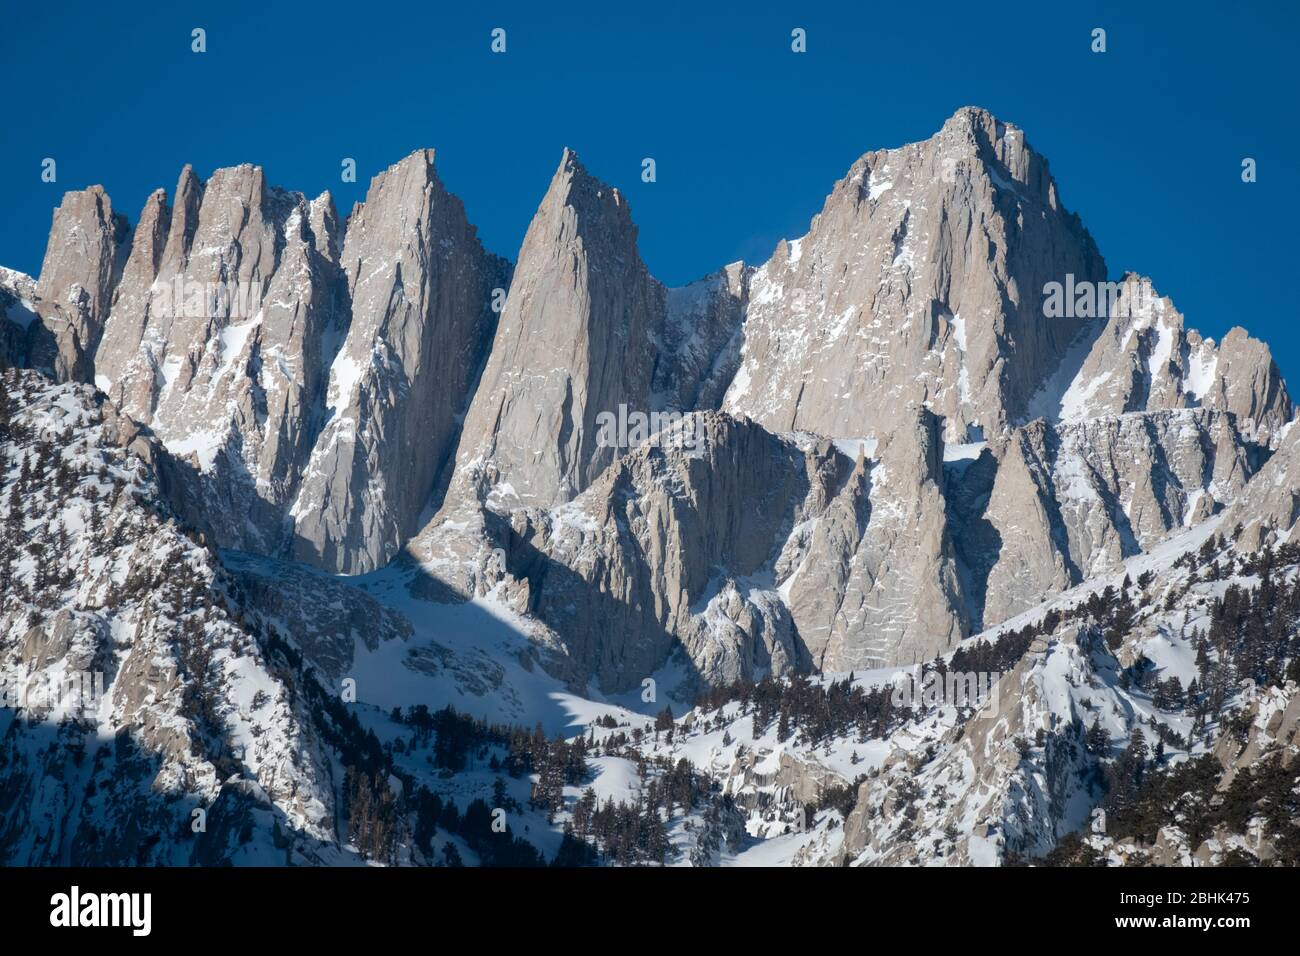 View of the tallest mountain in the continental United States, Mt. Whitney, viewed from the Owens Valley in Inyo County, California Stock Photo